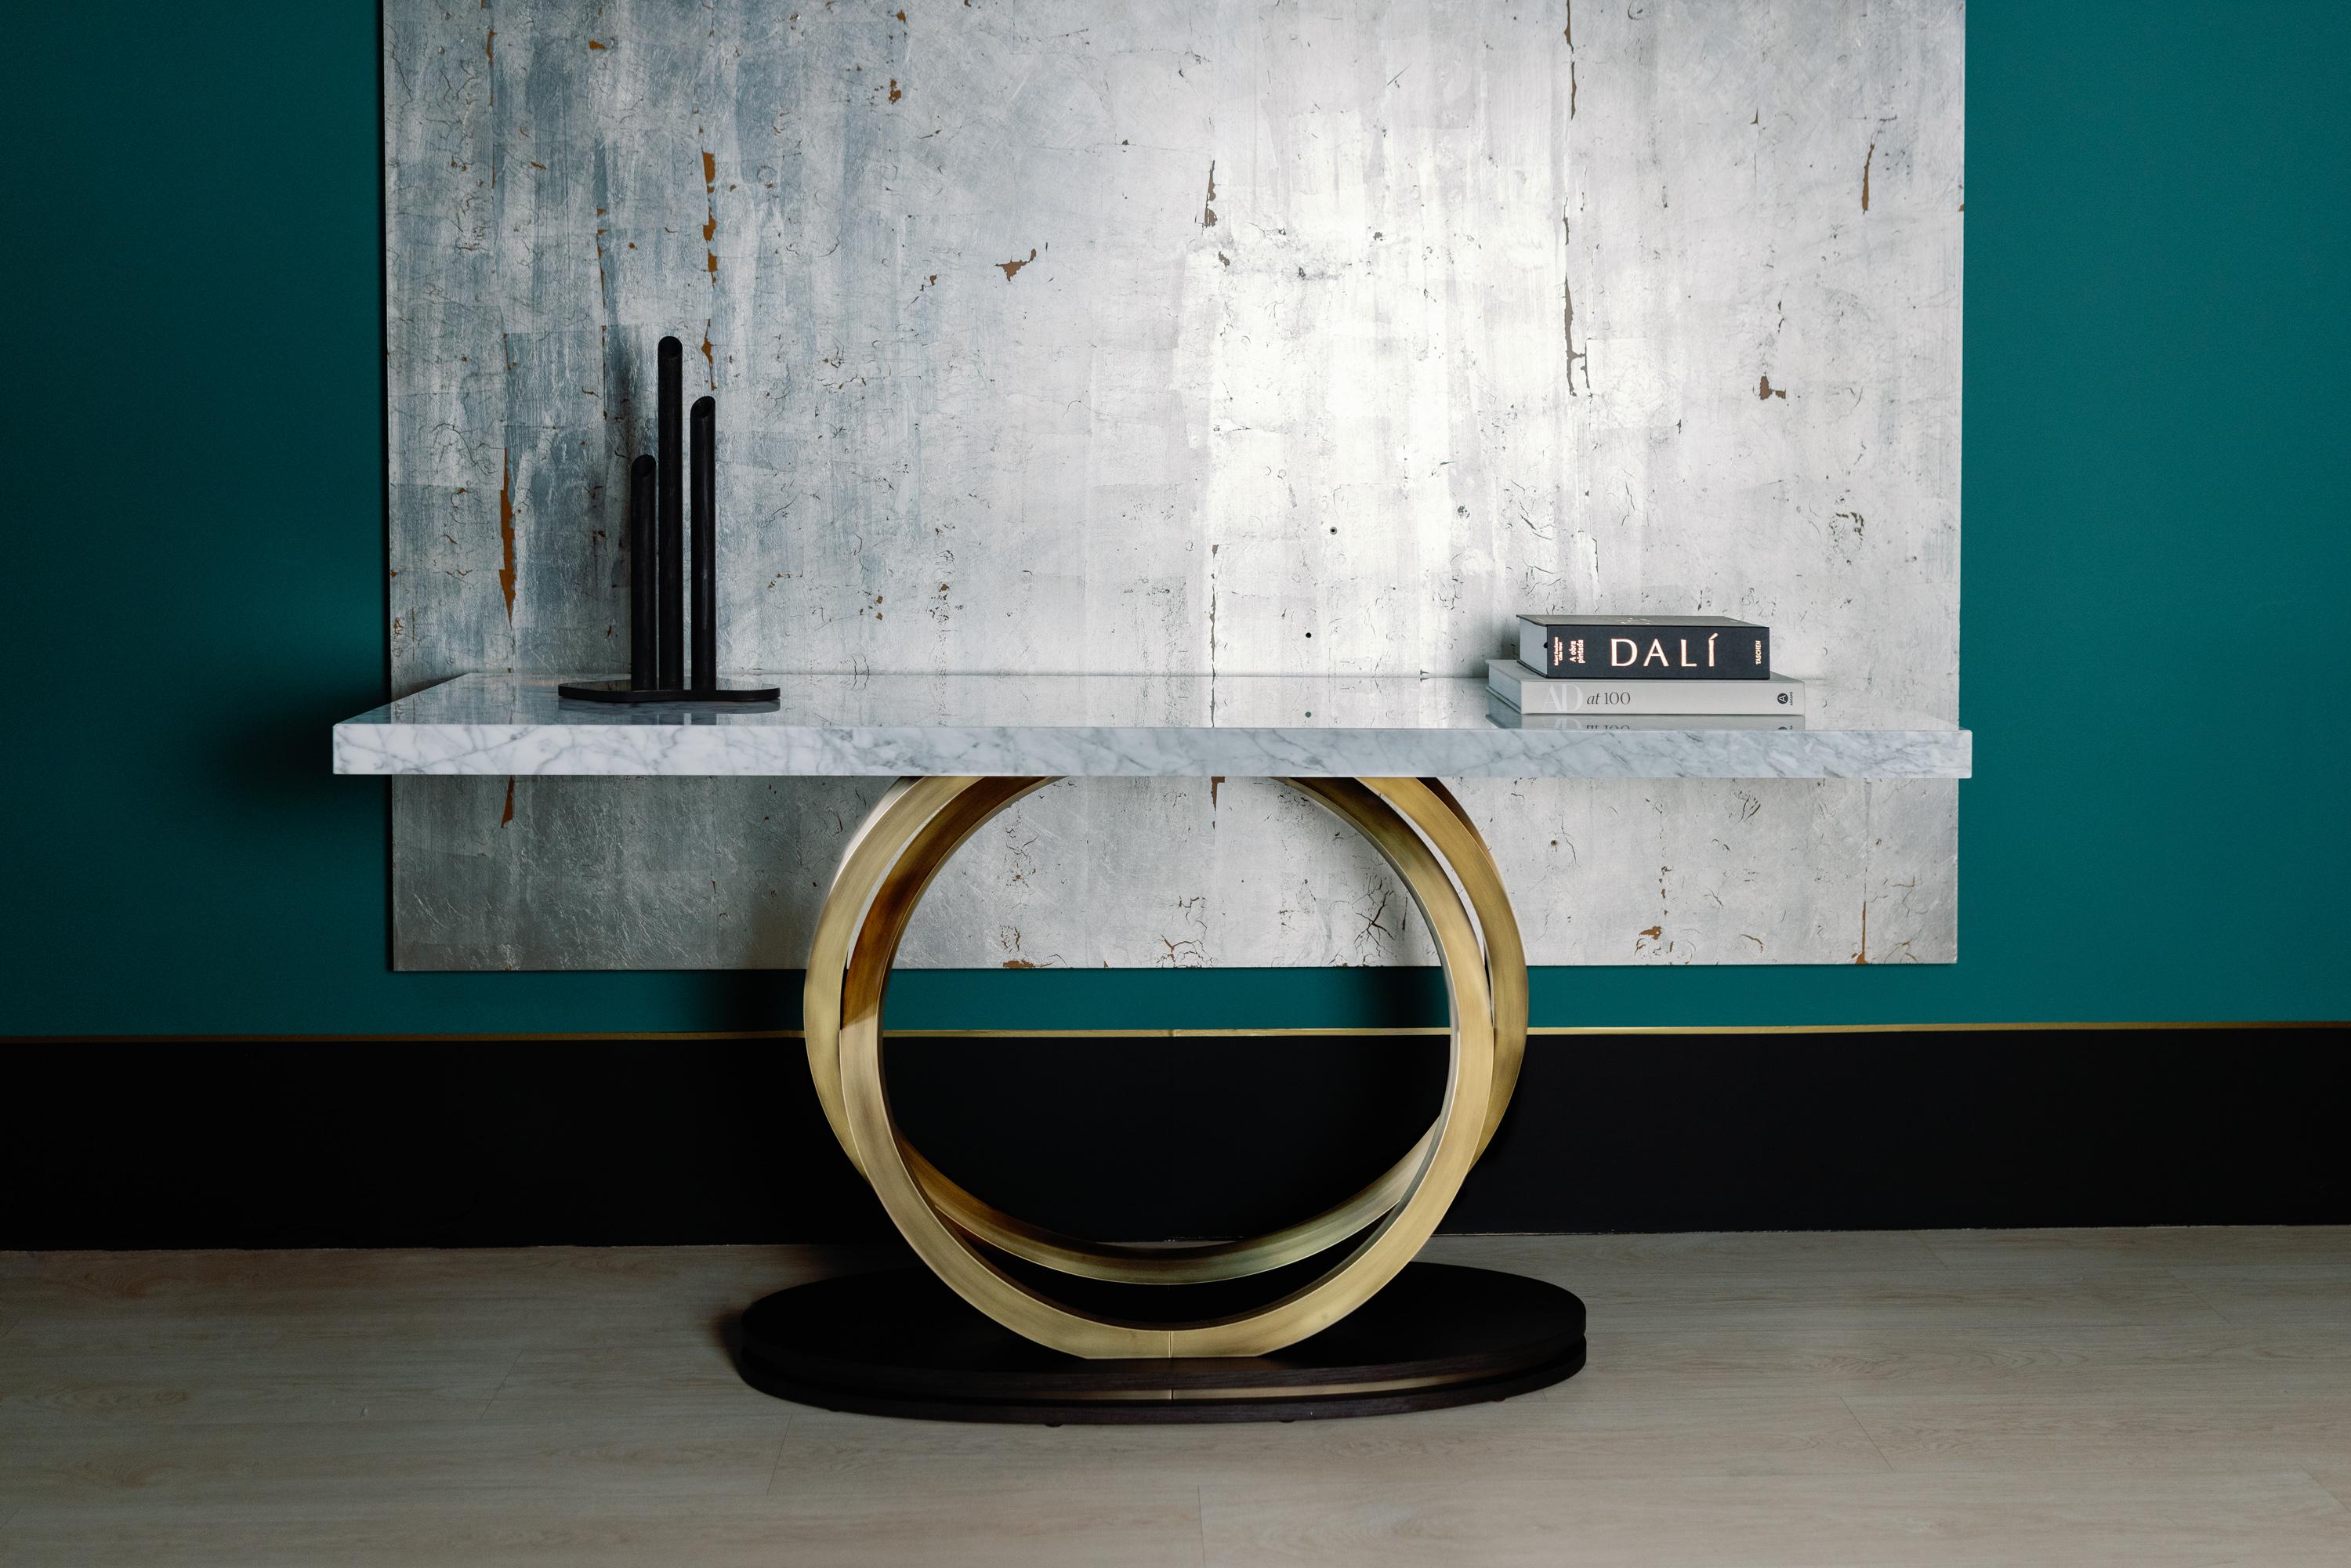 Armilar console table, Modern collection, handcrafted in Portugal - Europe by GF Modern.

The Armilar console table has a modern design that pays homage to the Portuguese armillary sphere, an instrument that allowed Portuguese navigators to sail